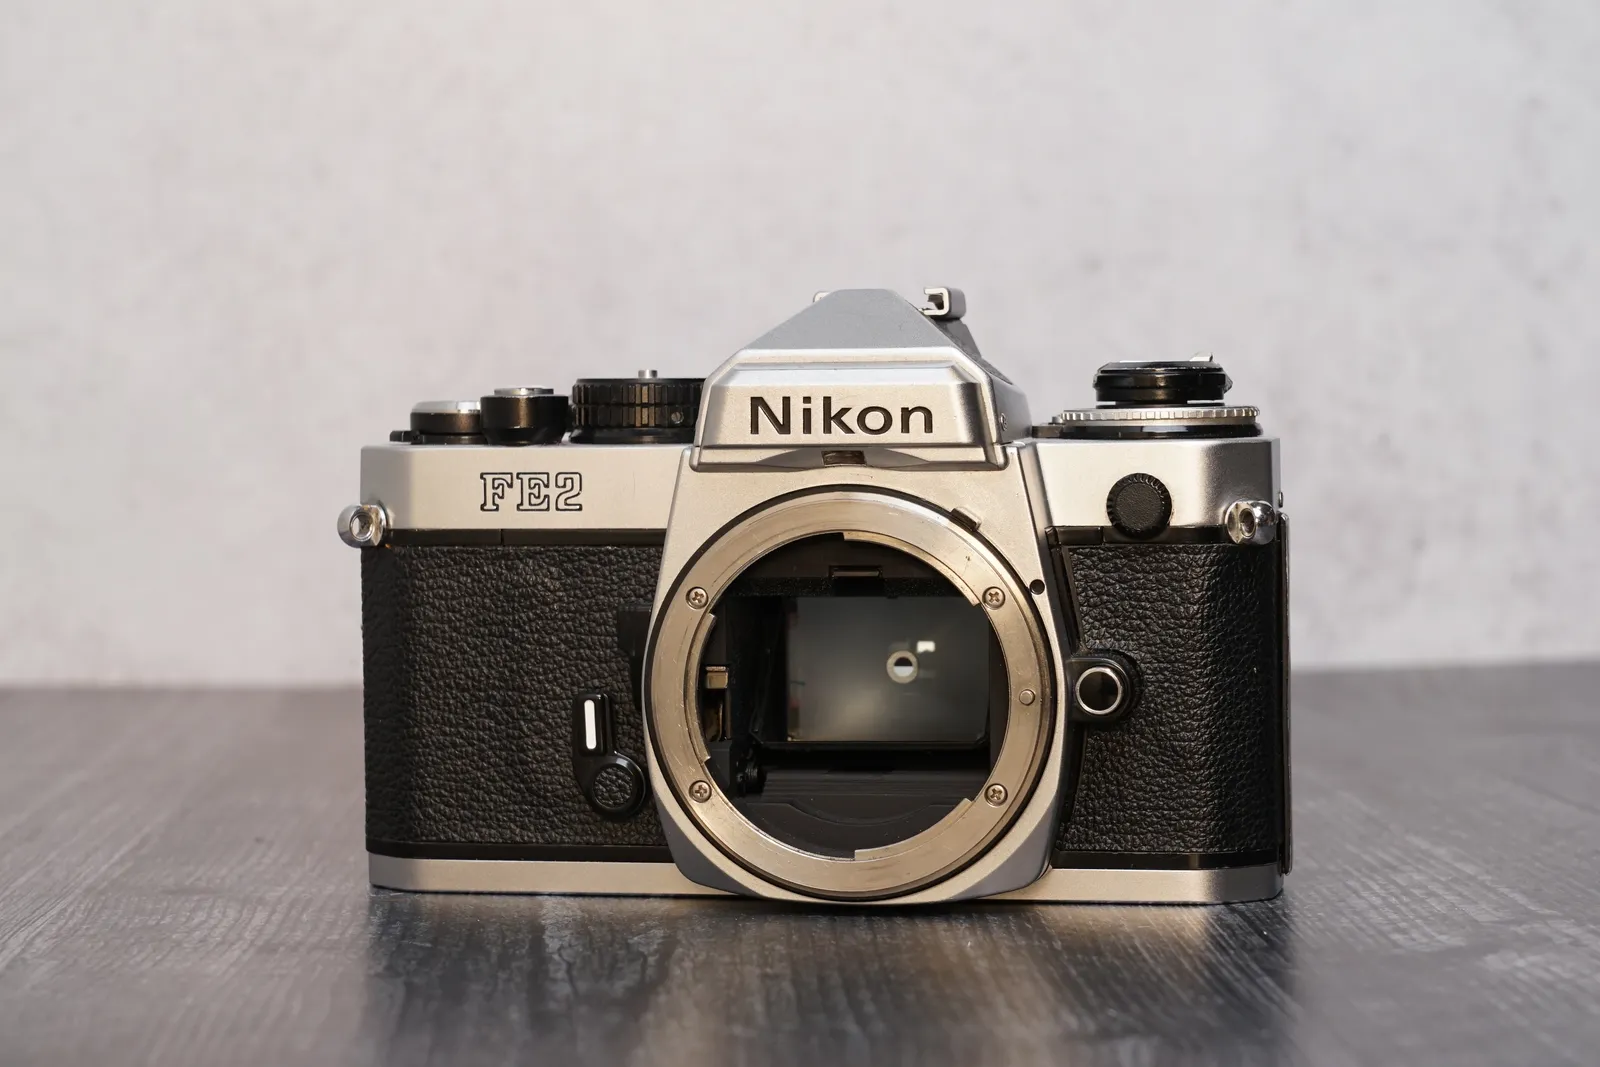 Nikon FE2 w/Micro-Nikkor 55mm f/3.5 lens From Focal Point